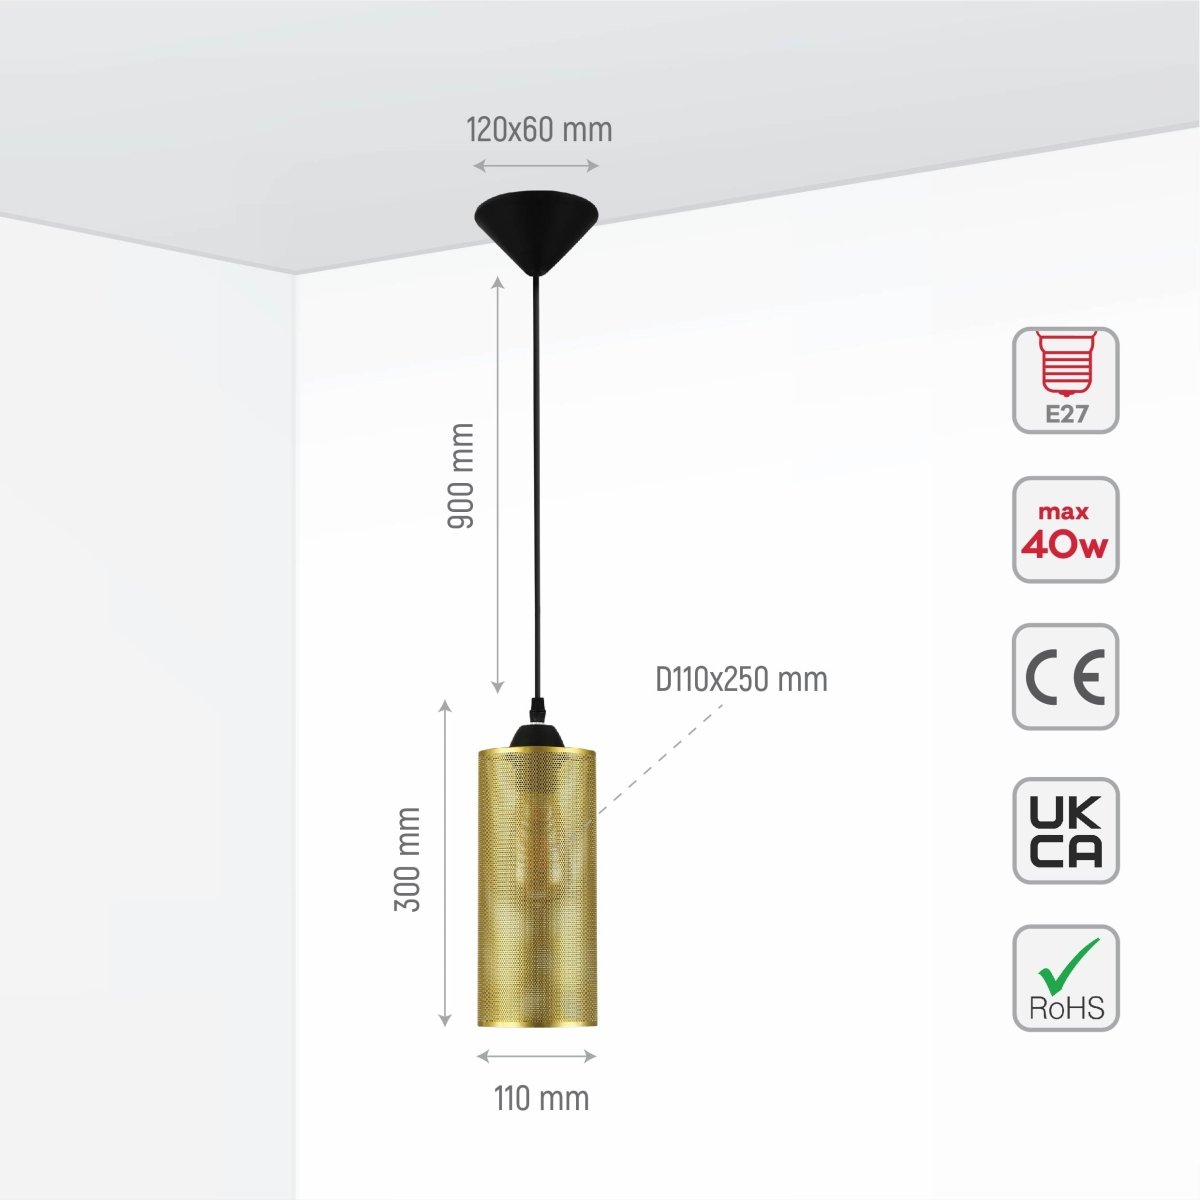 Size and specs of Sieve Chrome Cylinder Metal Pendant Ceiling Light D110 with E27 Fitting | TEKLED 158-19790